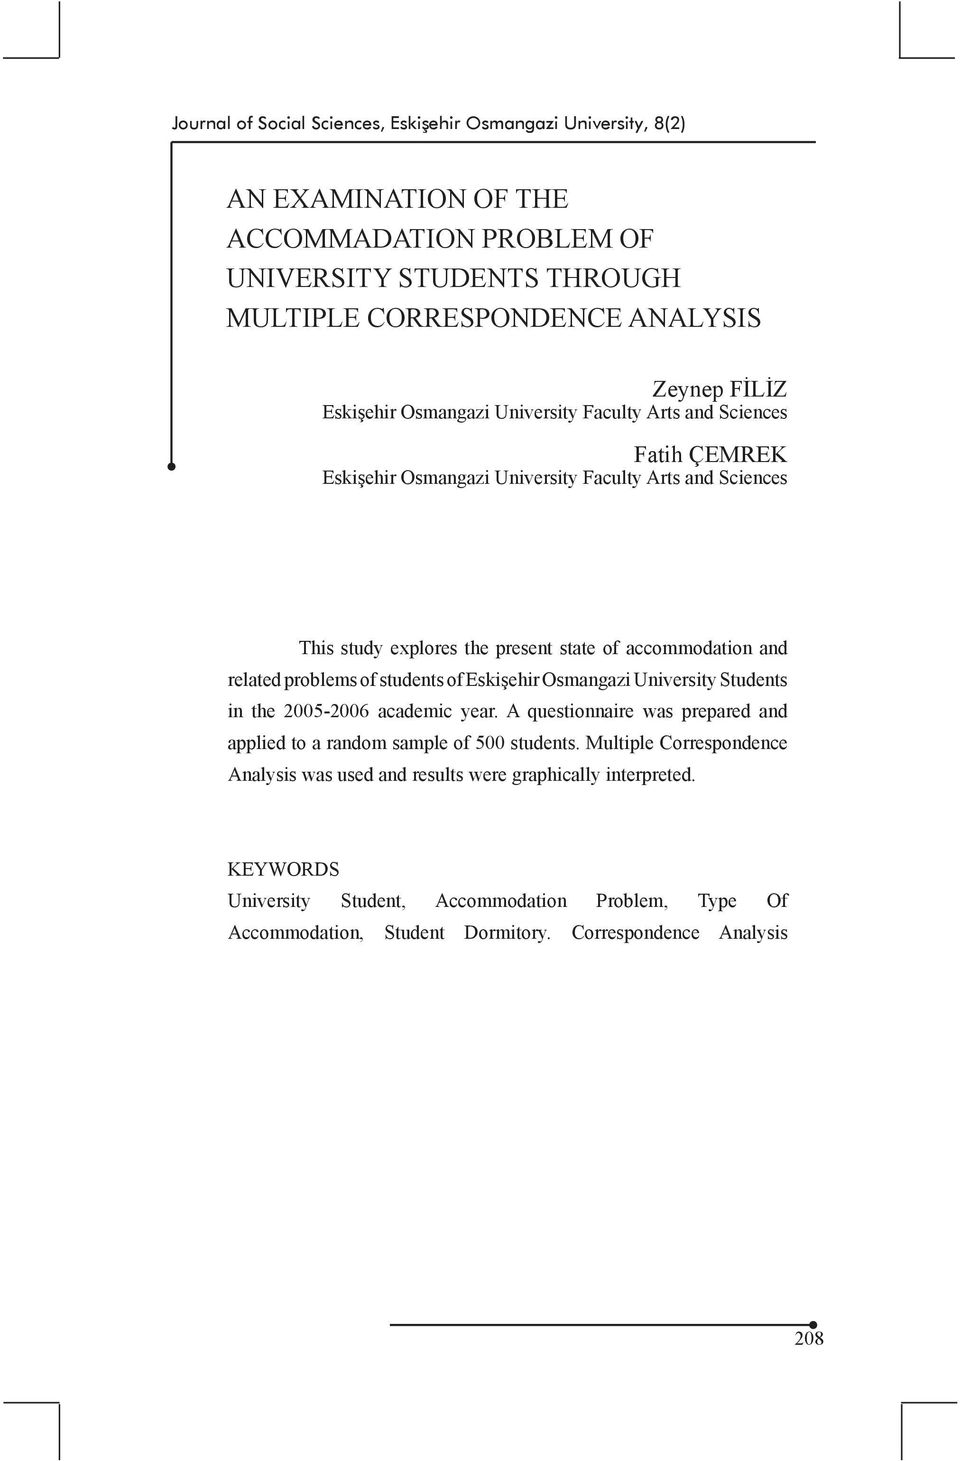 related problems of students of Eskişehir Osmangazi University Students in the 2005-2006 academic year. A questionnaire was prepared and applied to a random sample of 500 students.